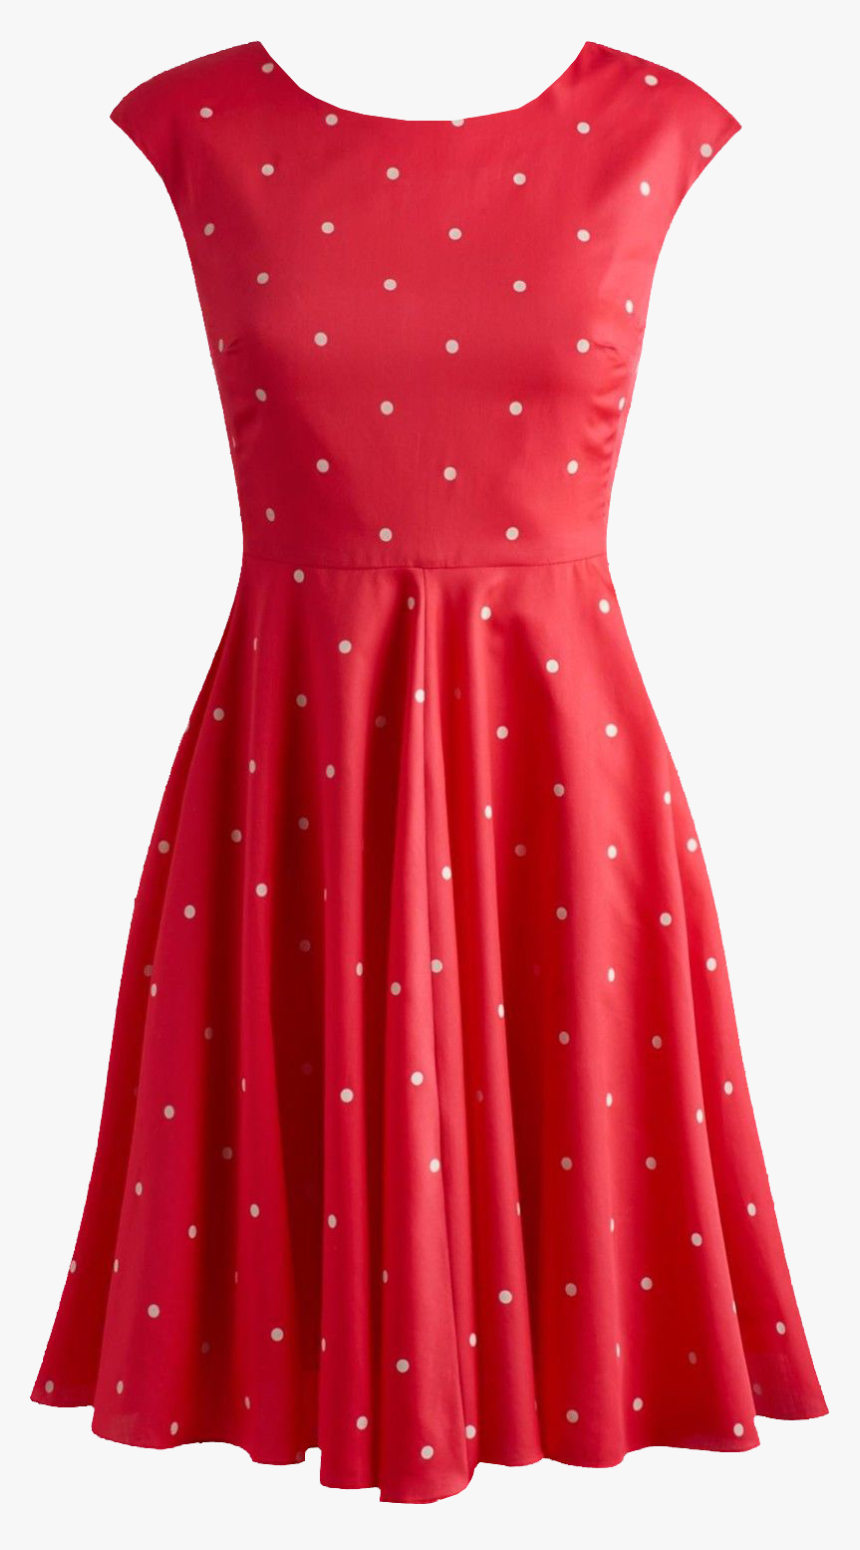 Fifties Style Red Dress Transparent Background Clothing - Women Dress Png, Png Download, Free Download